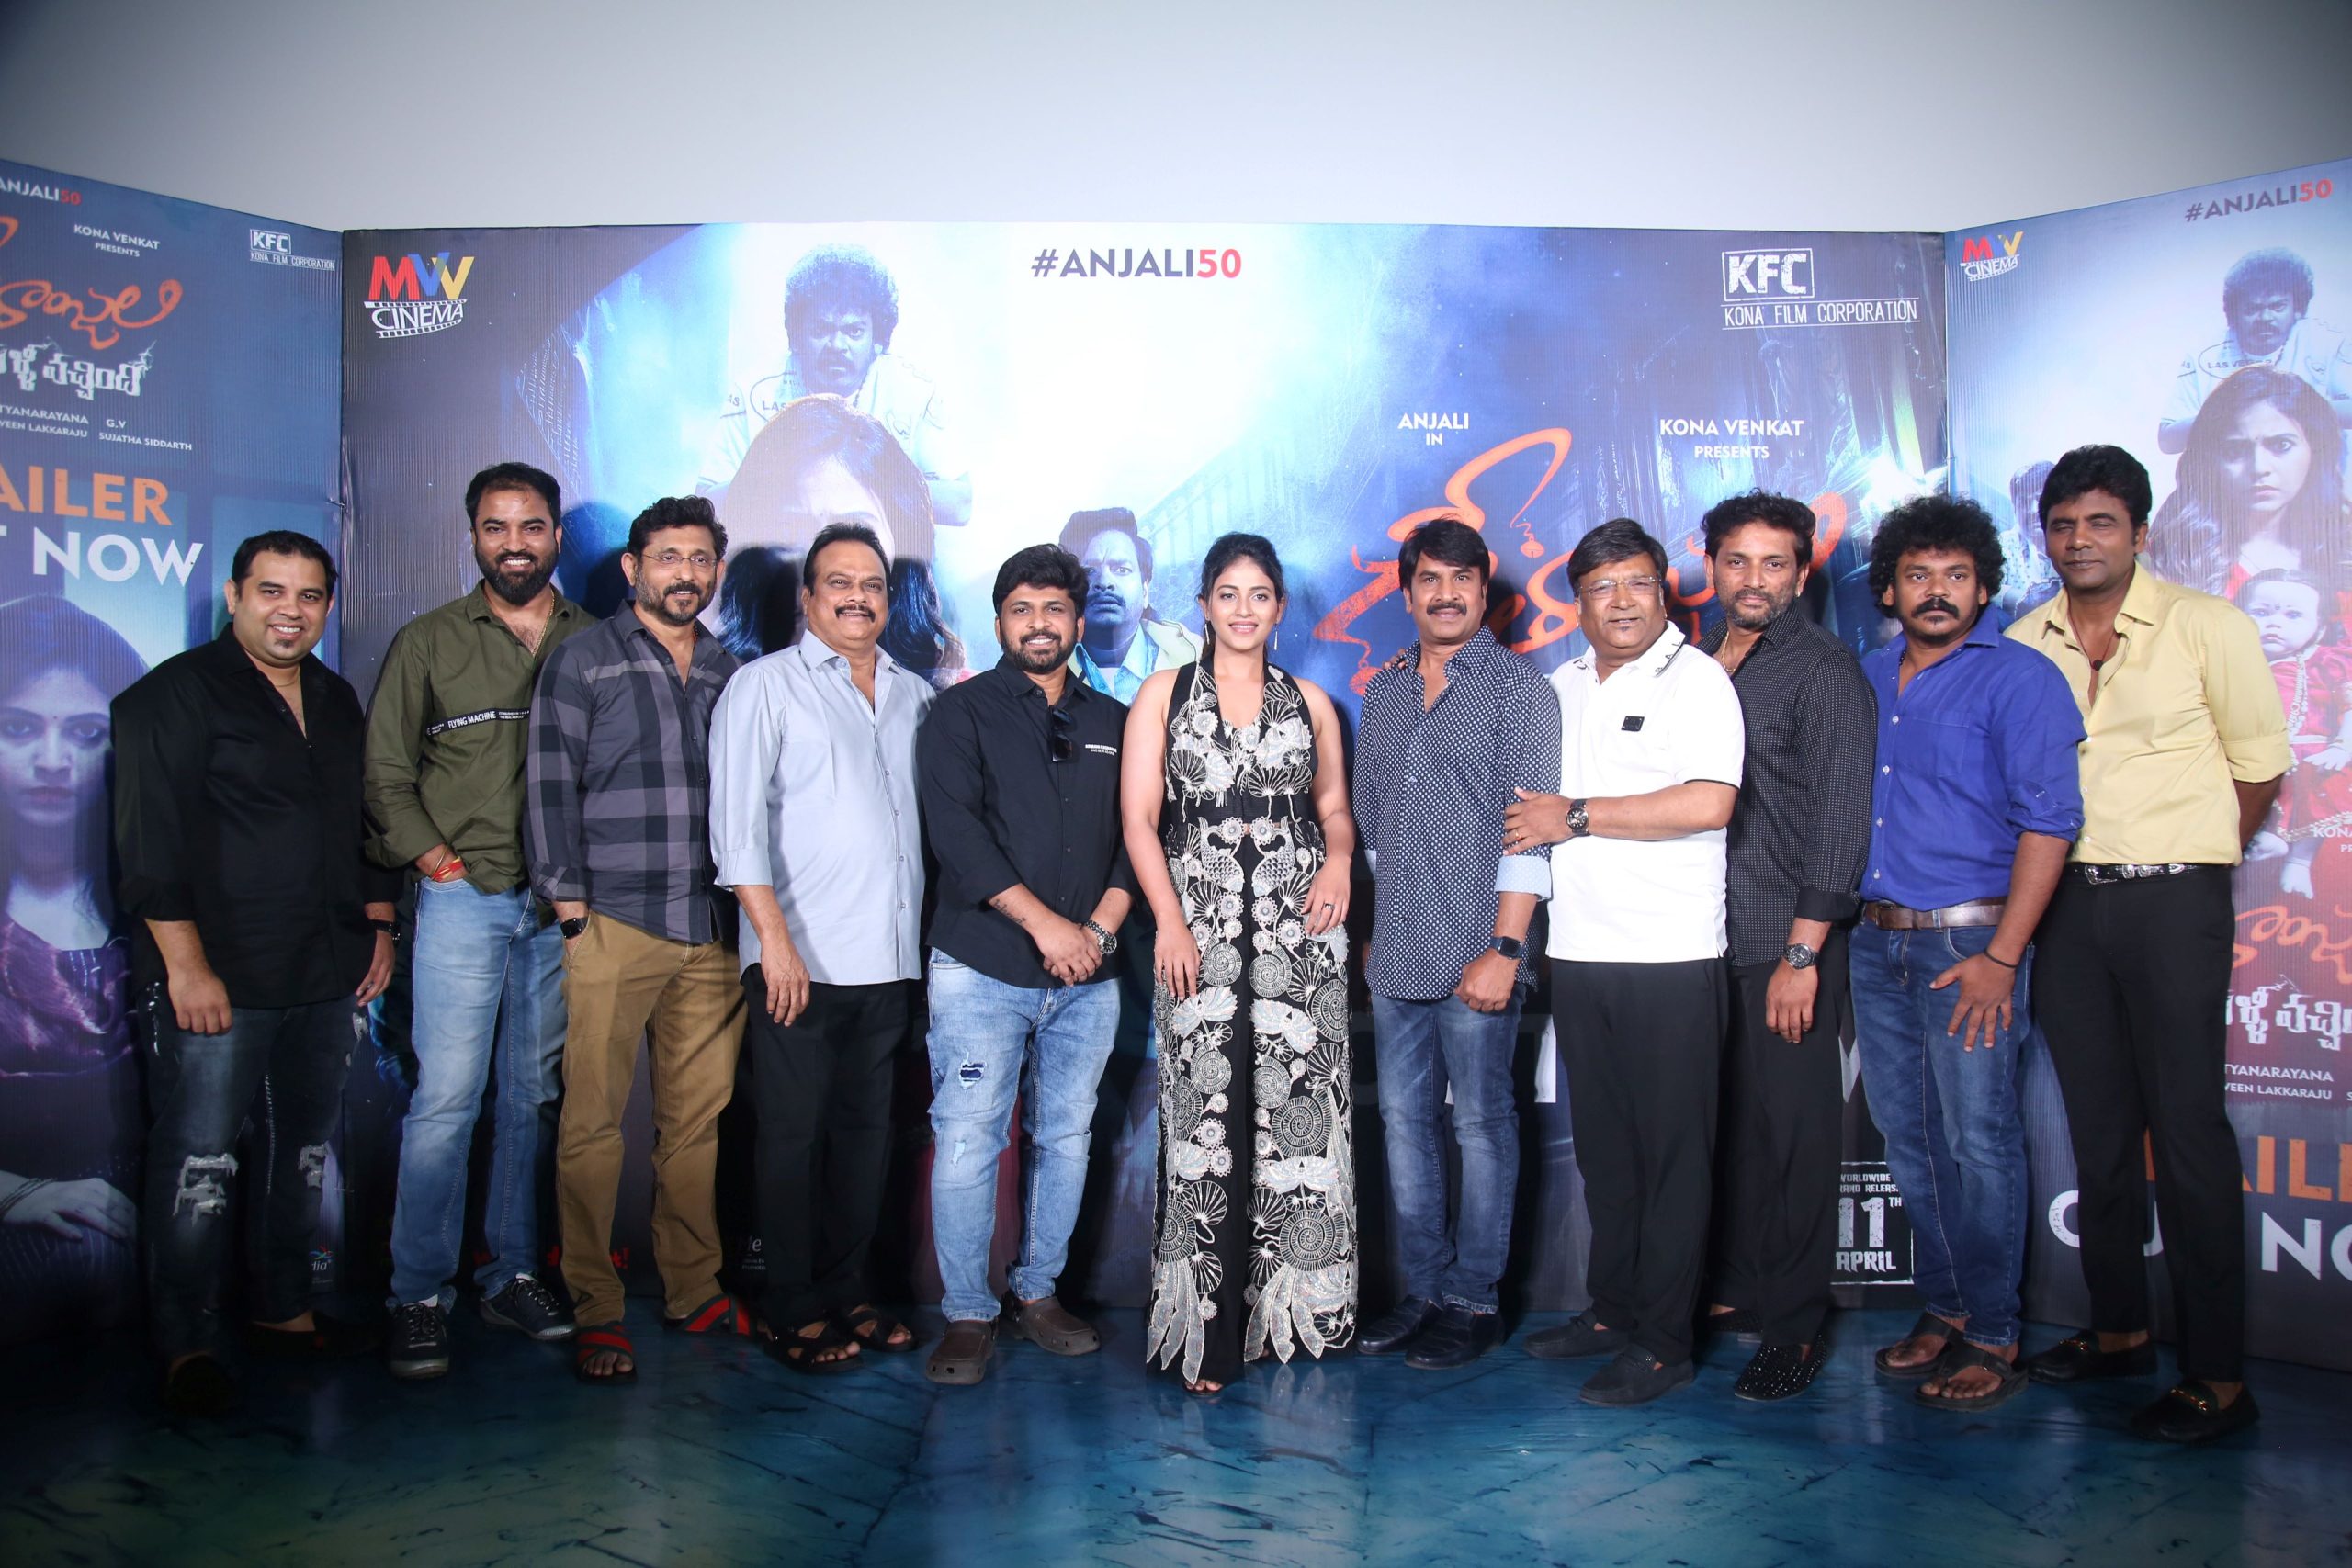 Geethanjali Malli Vachindhi Movie Trailer Launched